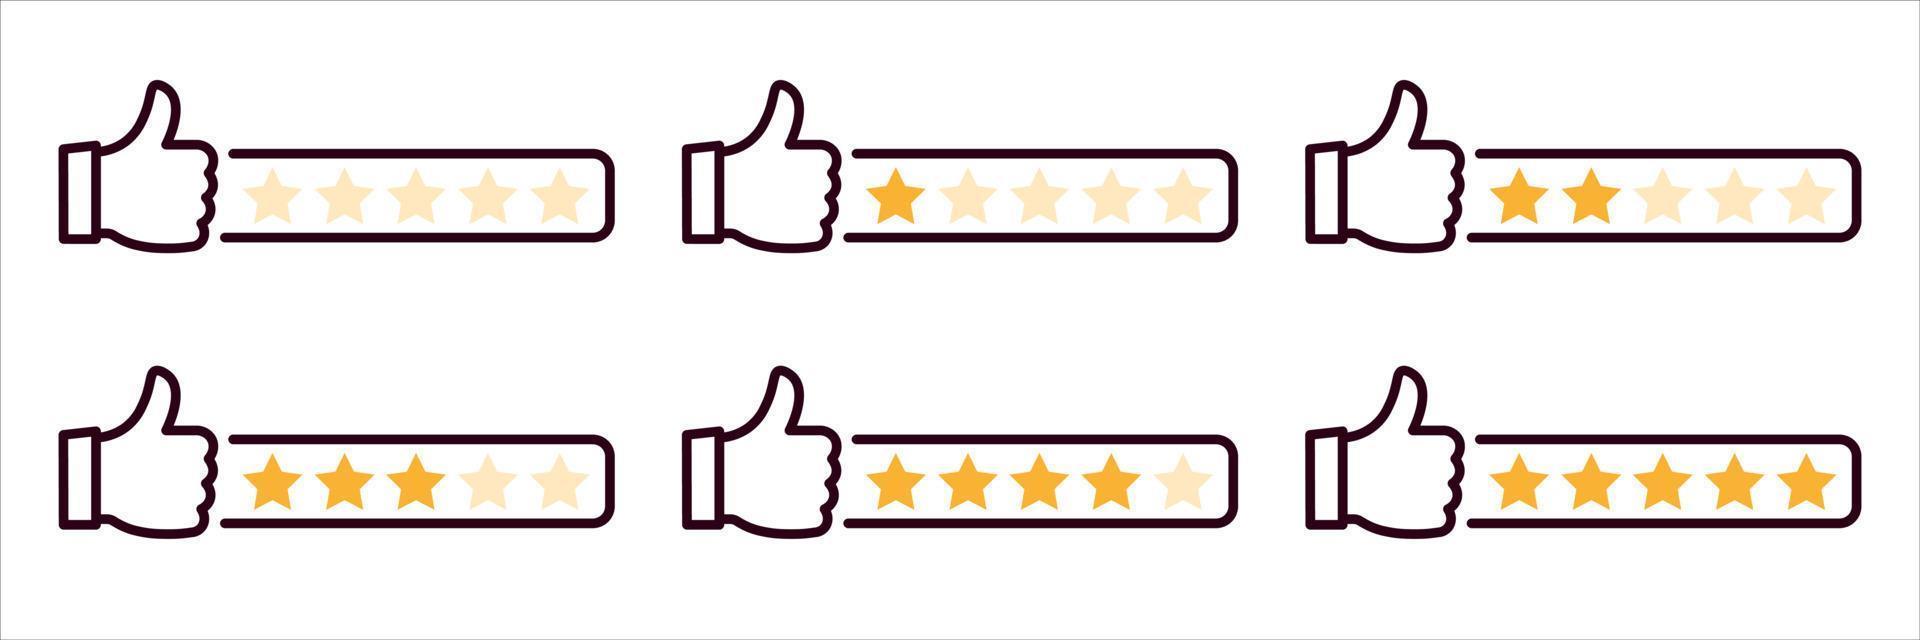 Level of satisfaction. Feedback evaluation with thumbs up. Customer review. User reviews with five stars ranking. Rating stars set. Isolated Vector illustration.